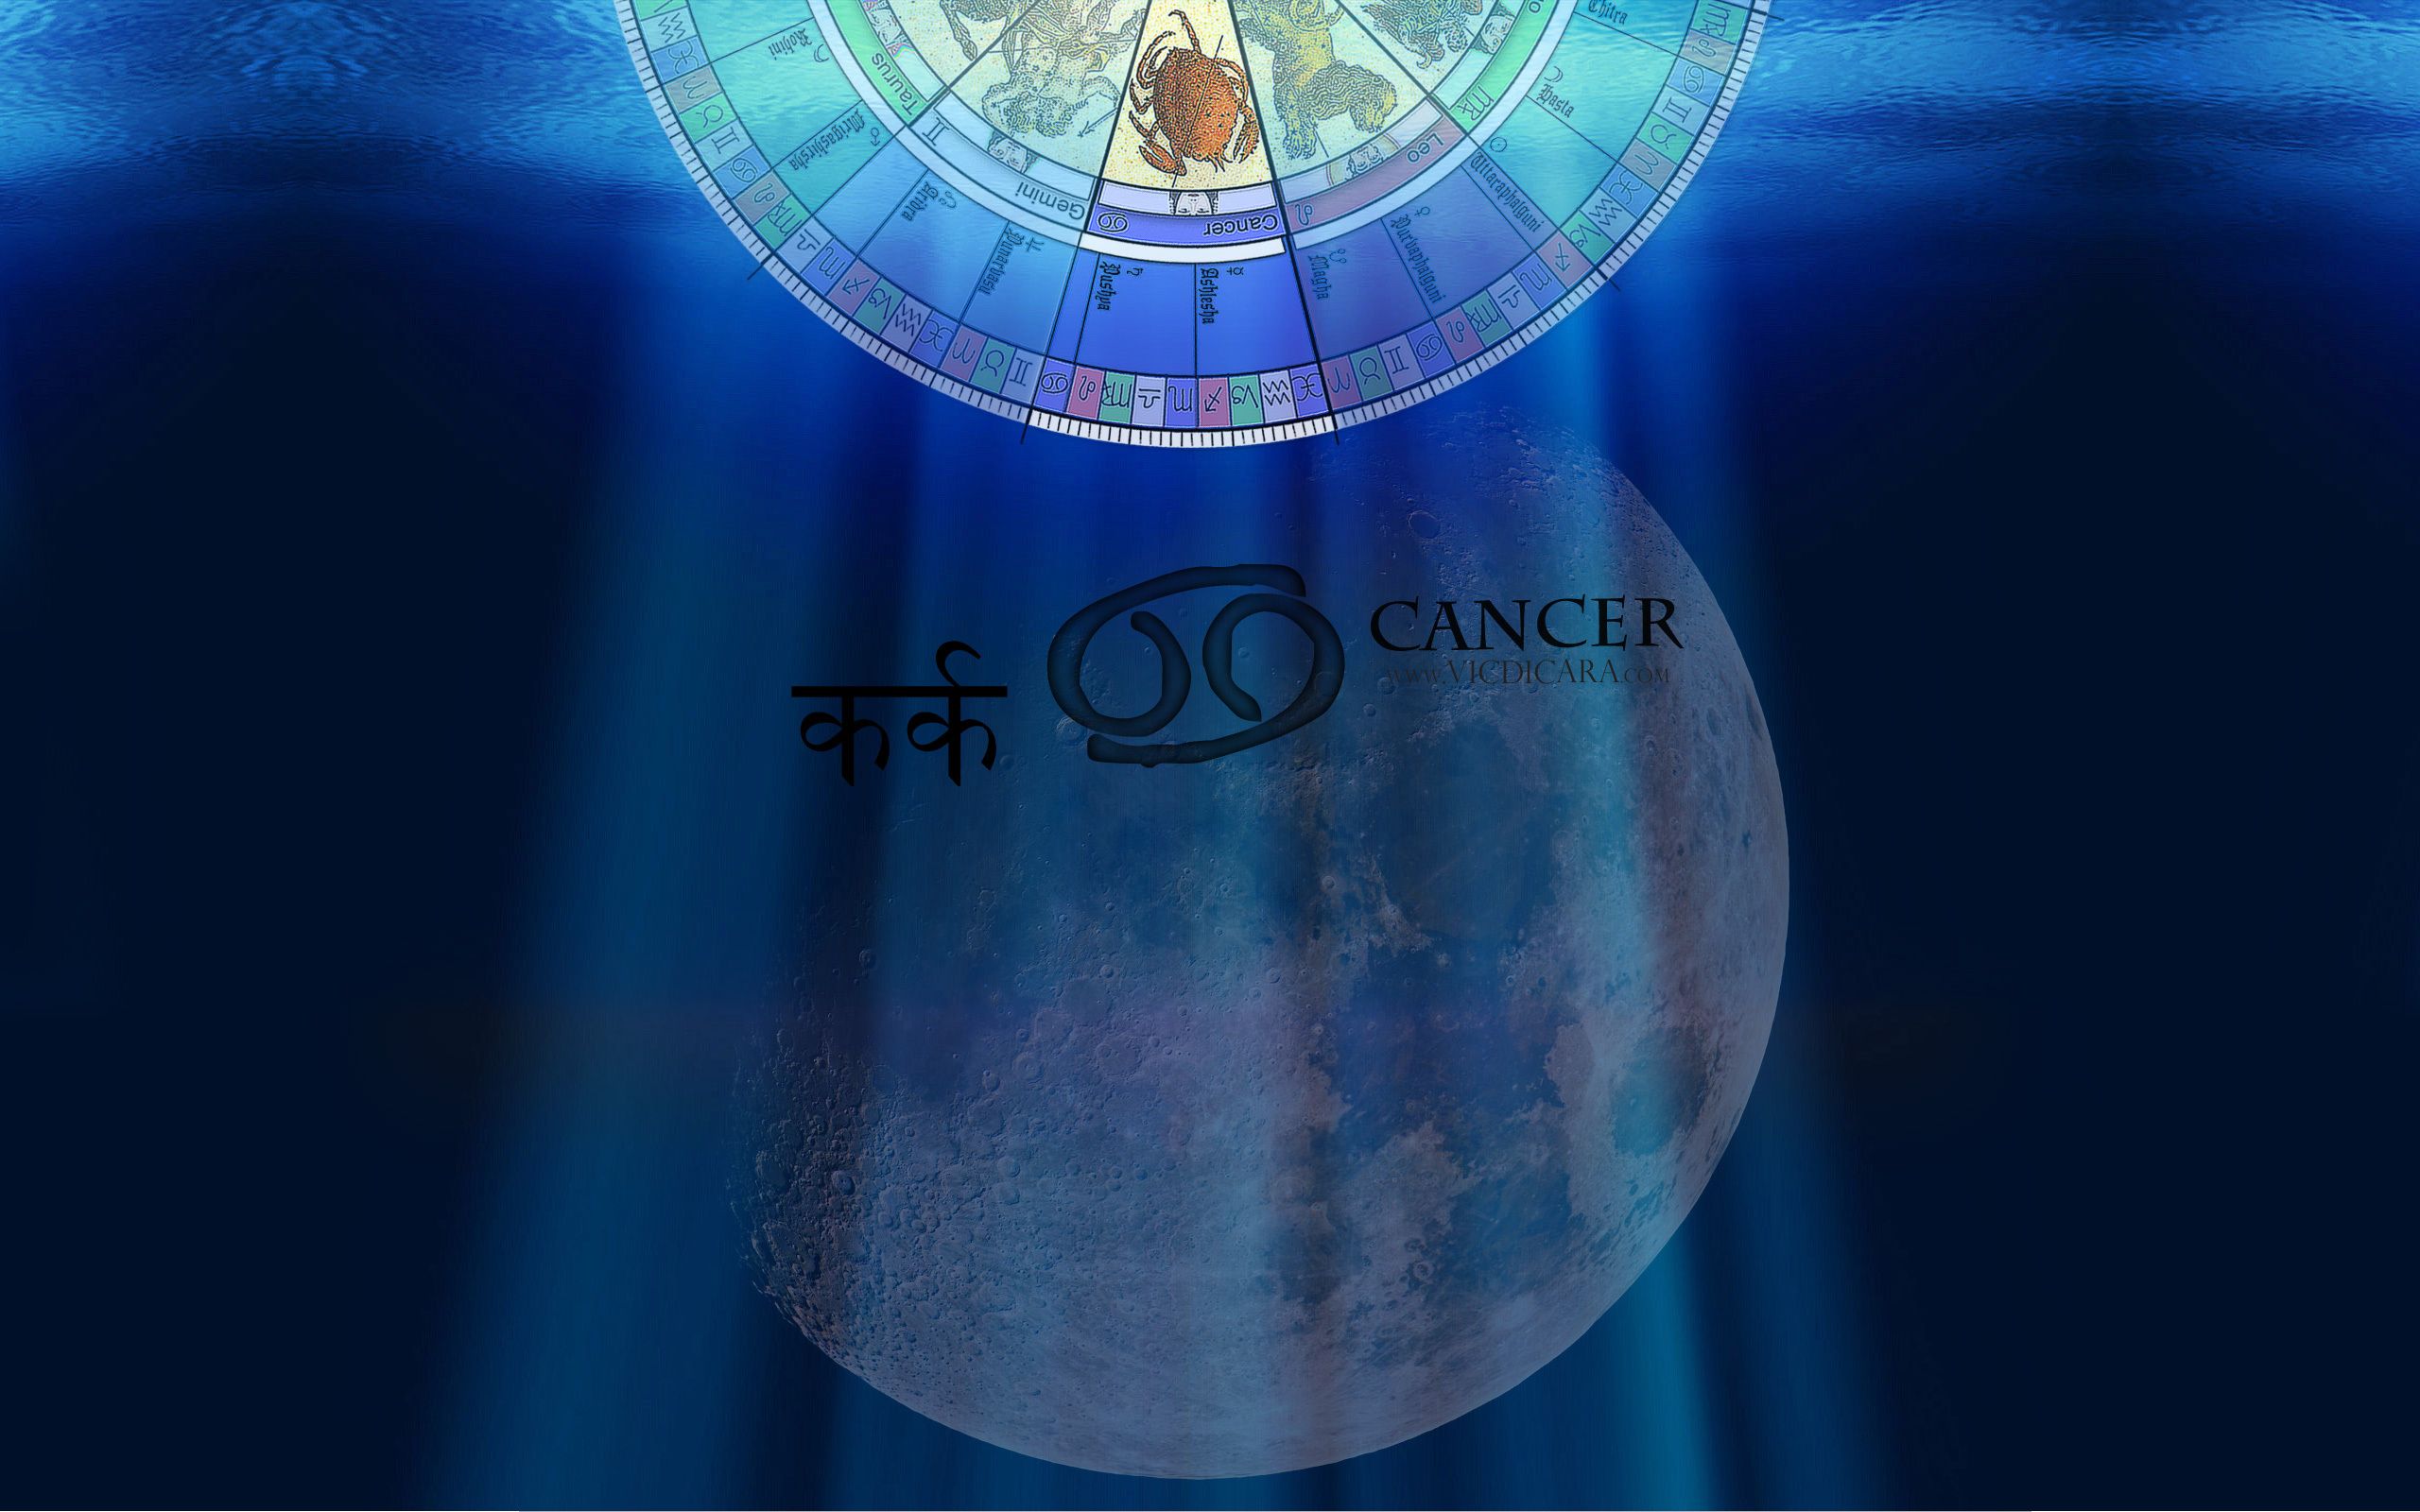 Zodiac sign cancer on the background of the moon wallpapers and other